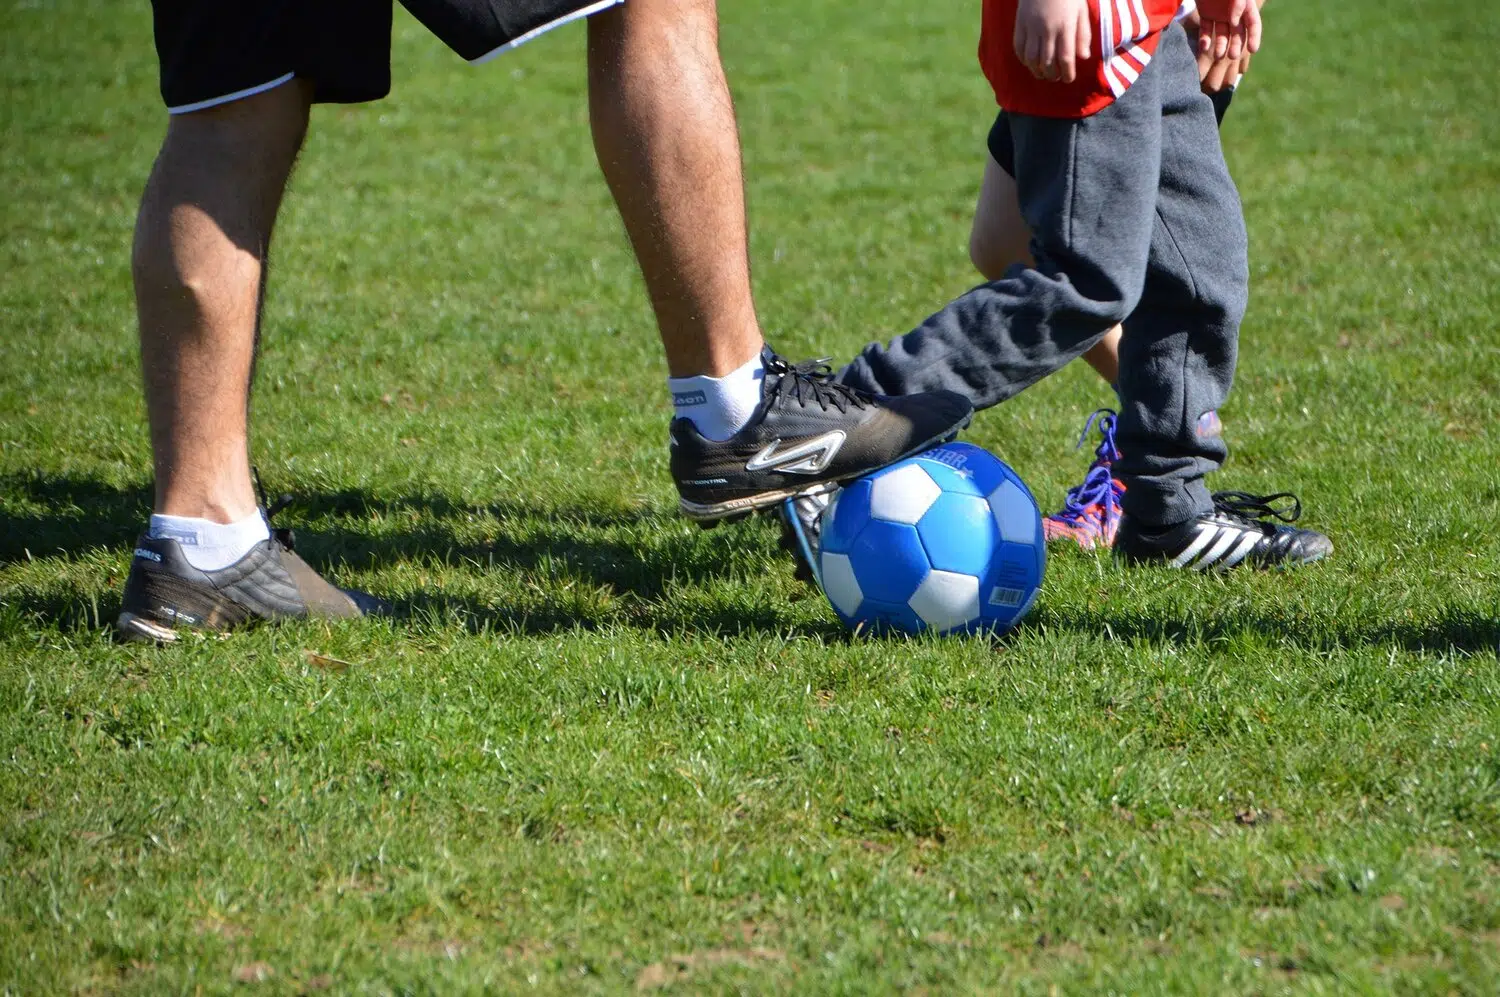 Man and child playing football